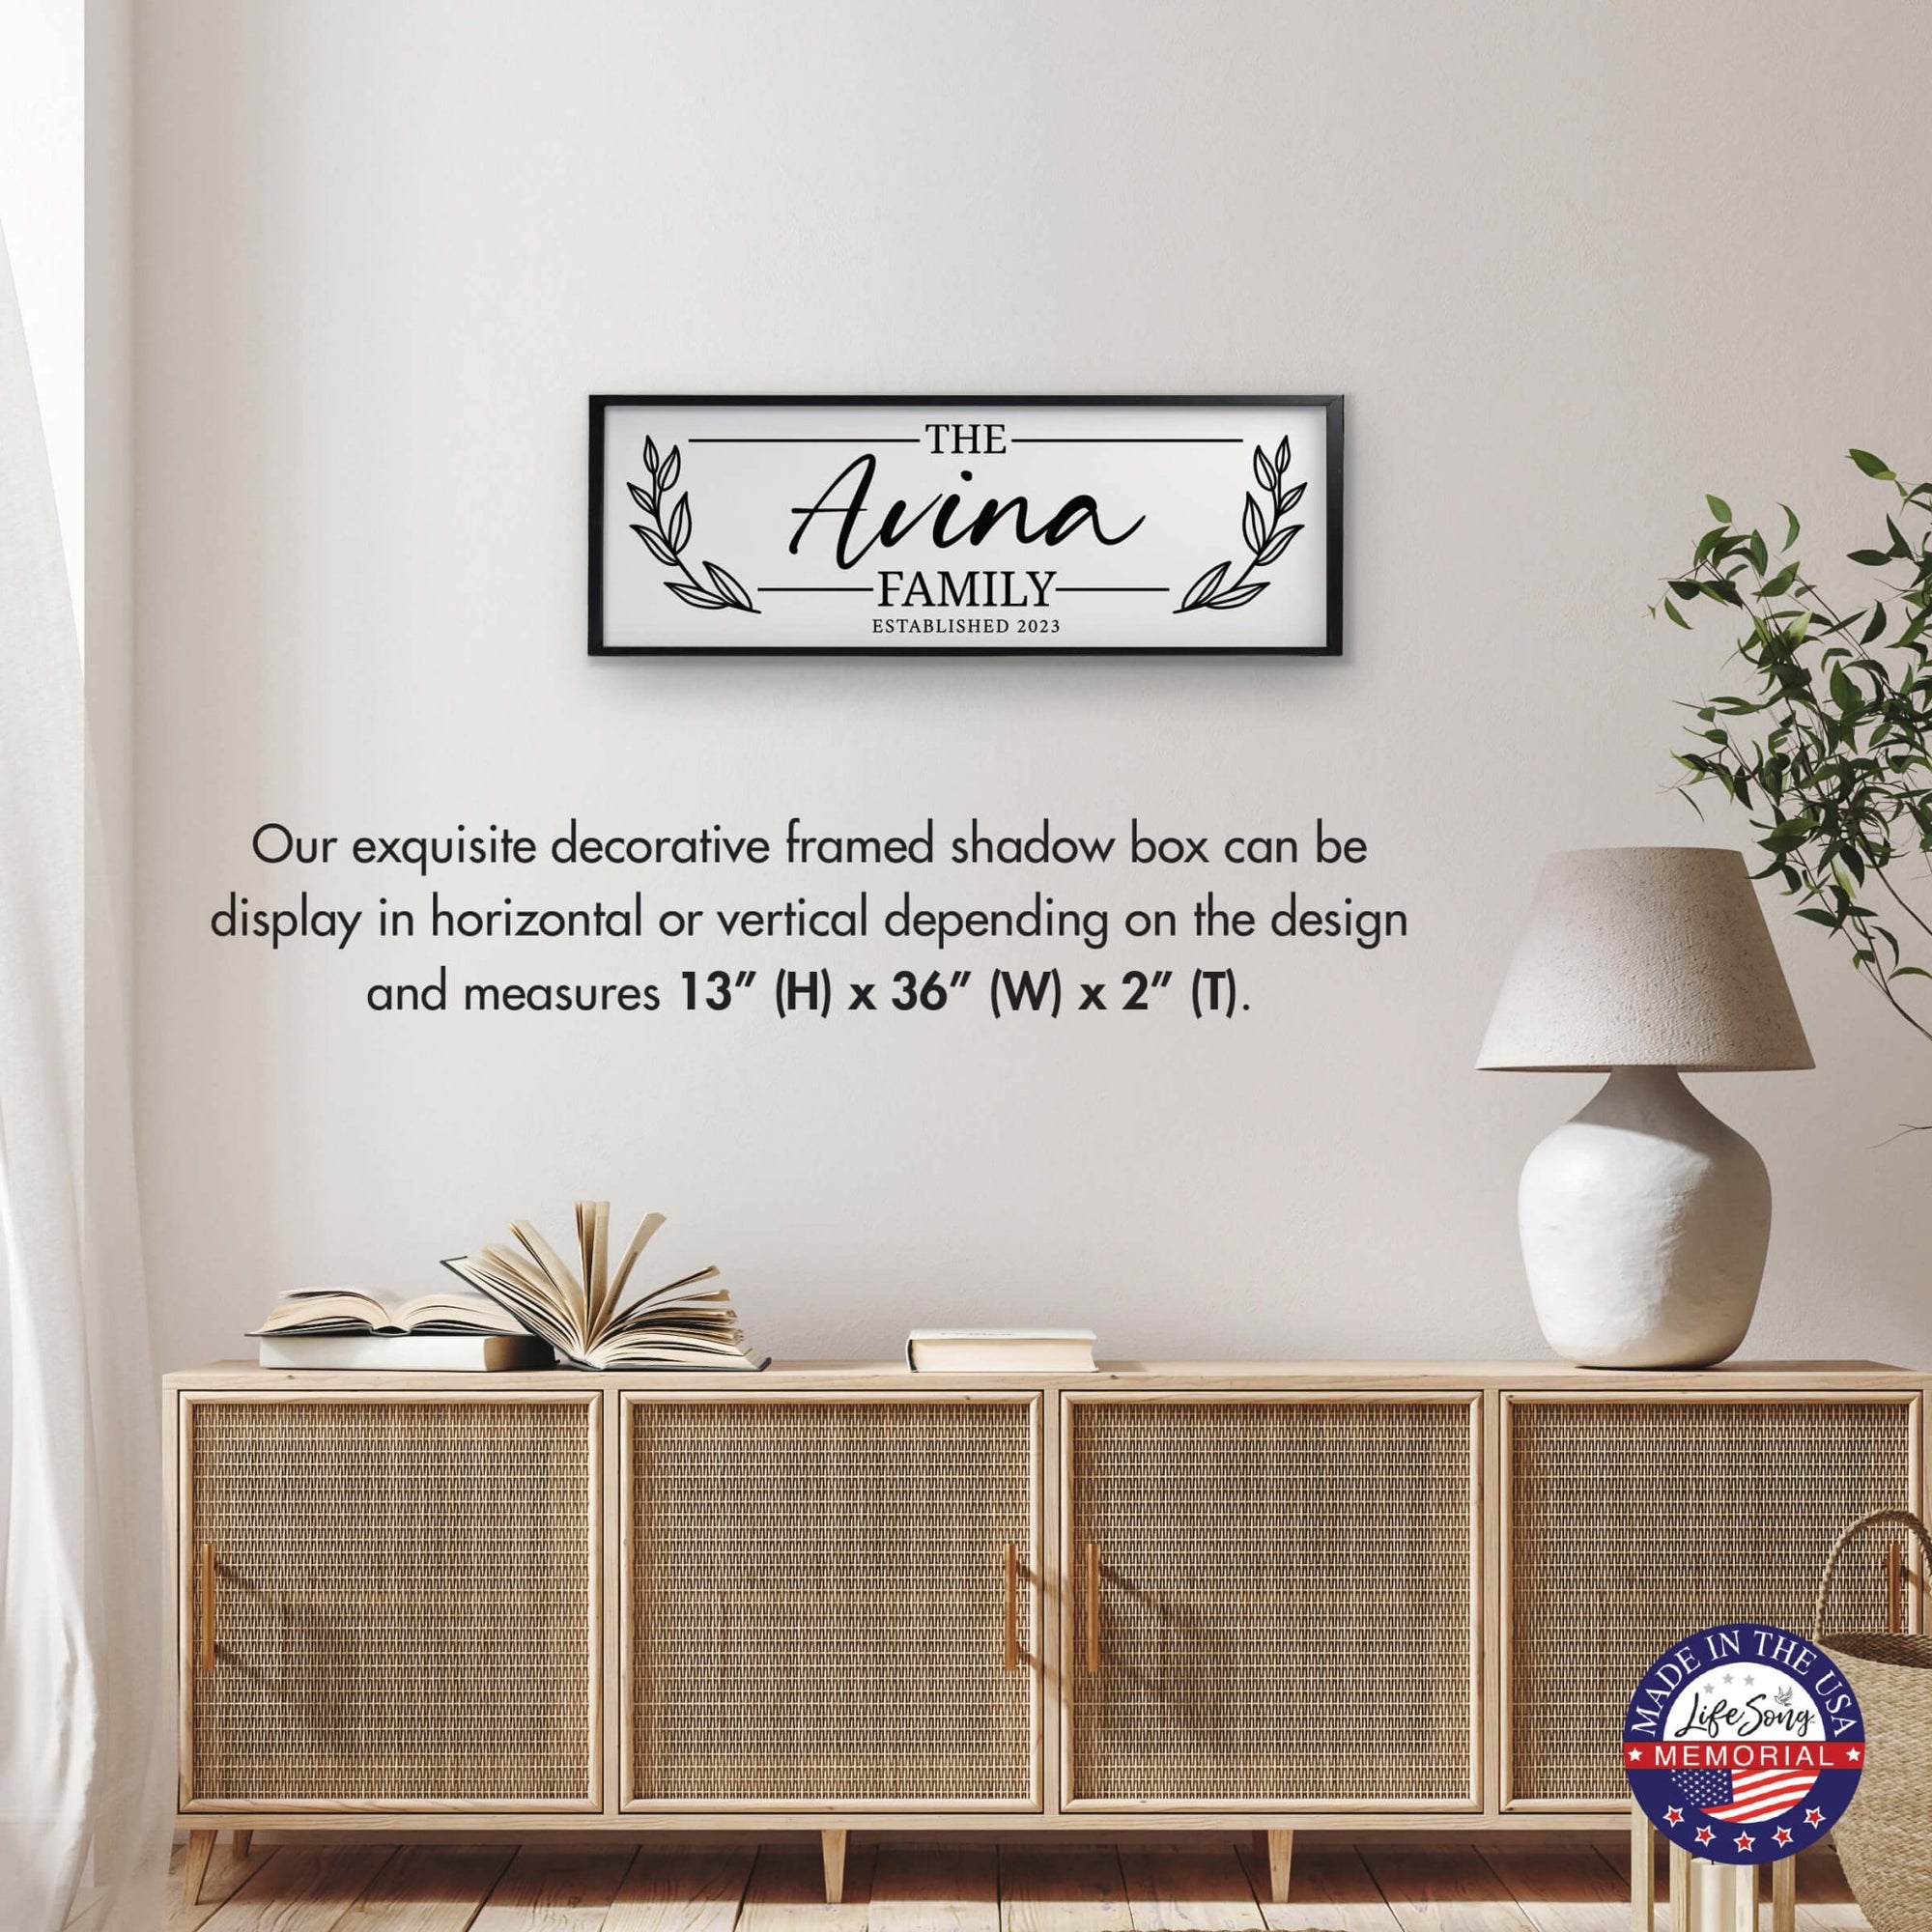 Personalized Family Wall Hanging Décor Framed Shadow Box For Home Décor - The Avina Family V2 - LifeSong Milestones